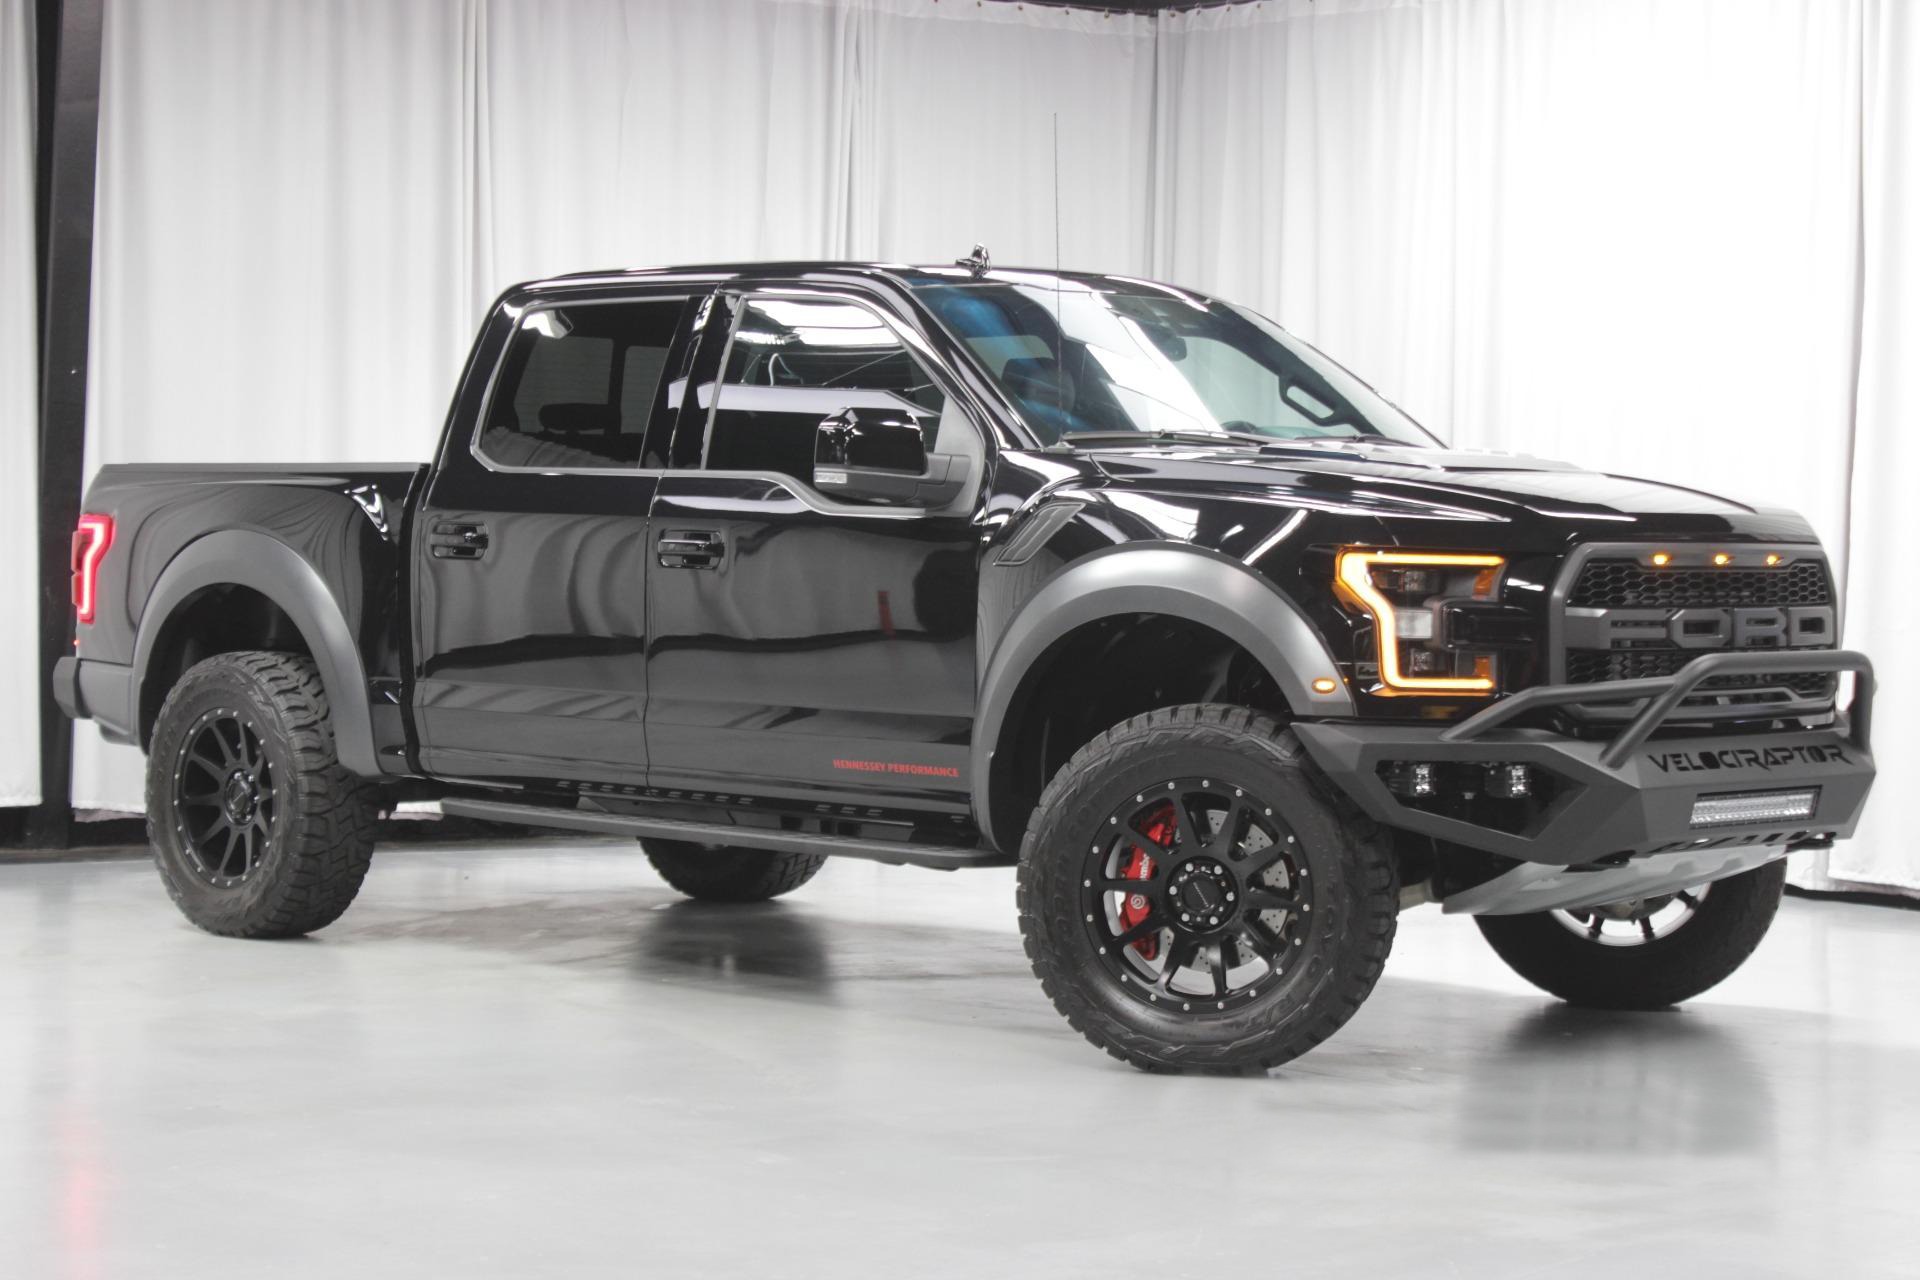 Used 2019 Ford F-150 RAPTOR 4x4 HENNESSY VELOCIRAPTOR VR600 UPGRADE (600HP) for sale Sold at Formula Imports in Charlotte NC 28227 2